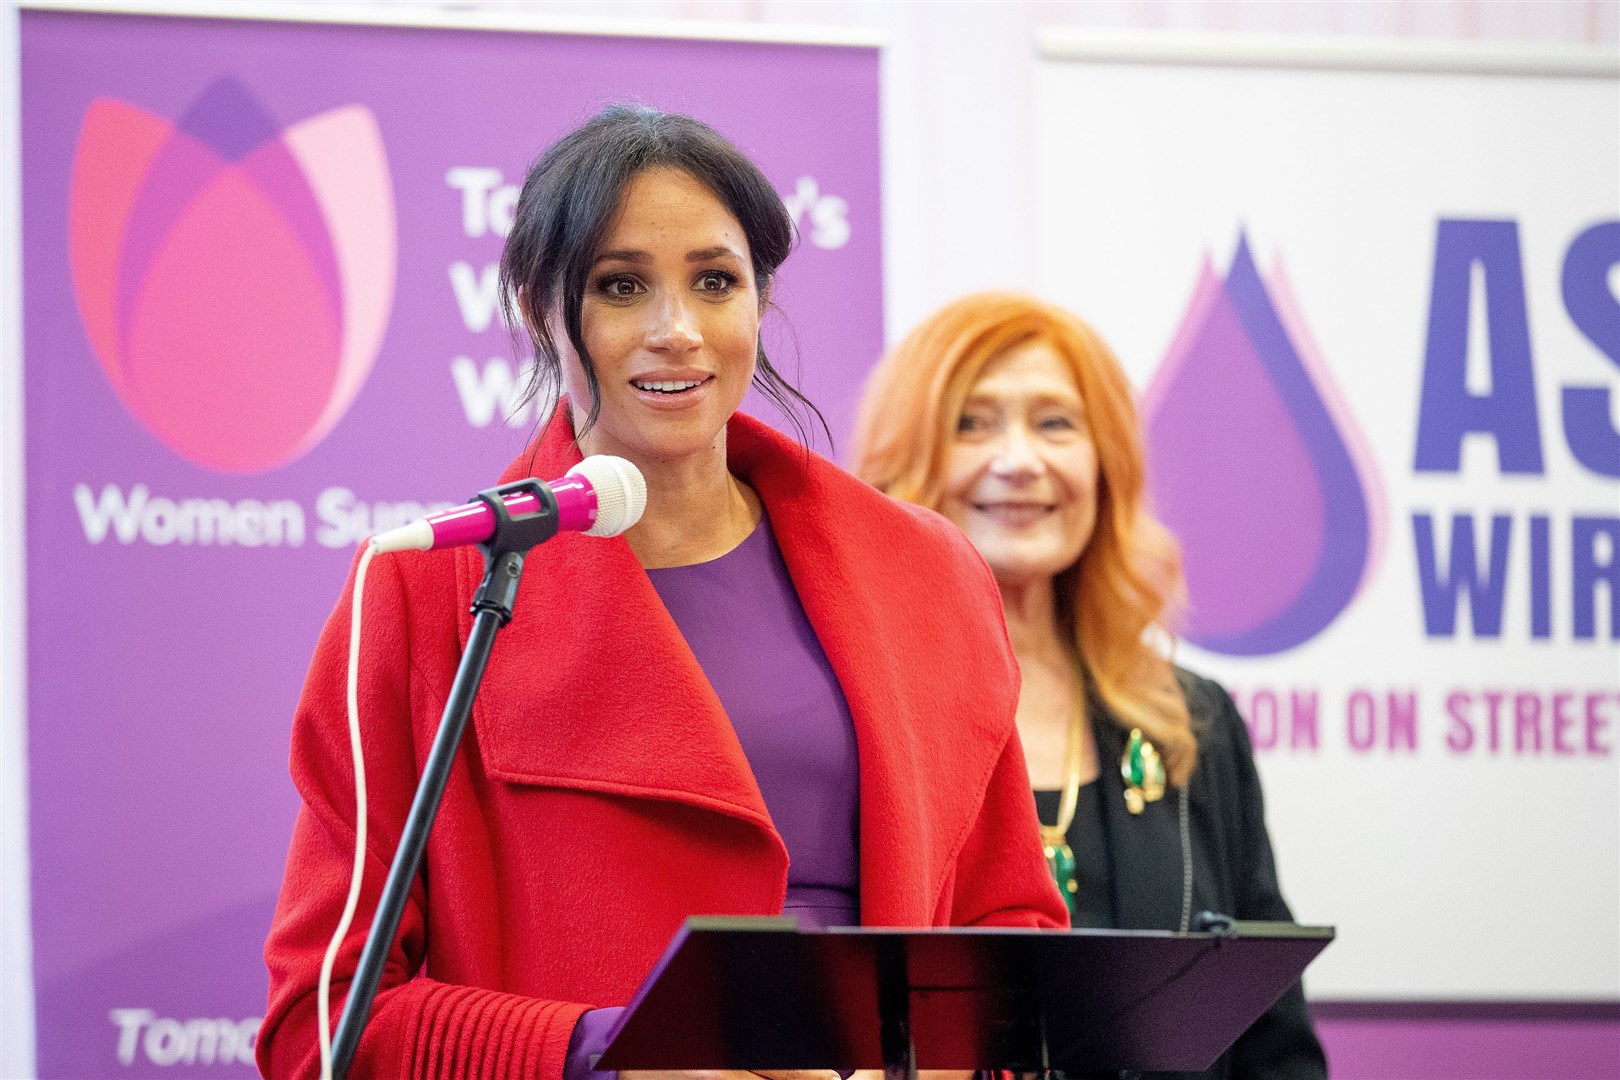 Meghan has urged people to vote in the US presidential elections (Charlotte Graham/Daily Telegraph/PA)